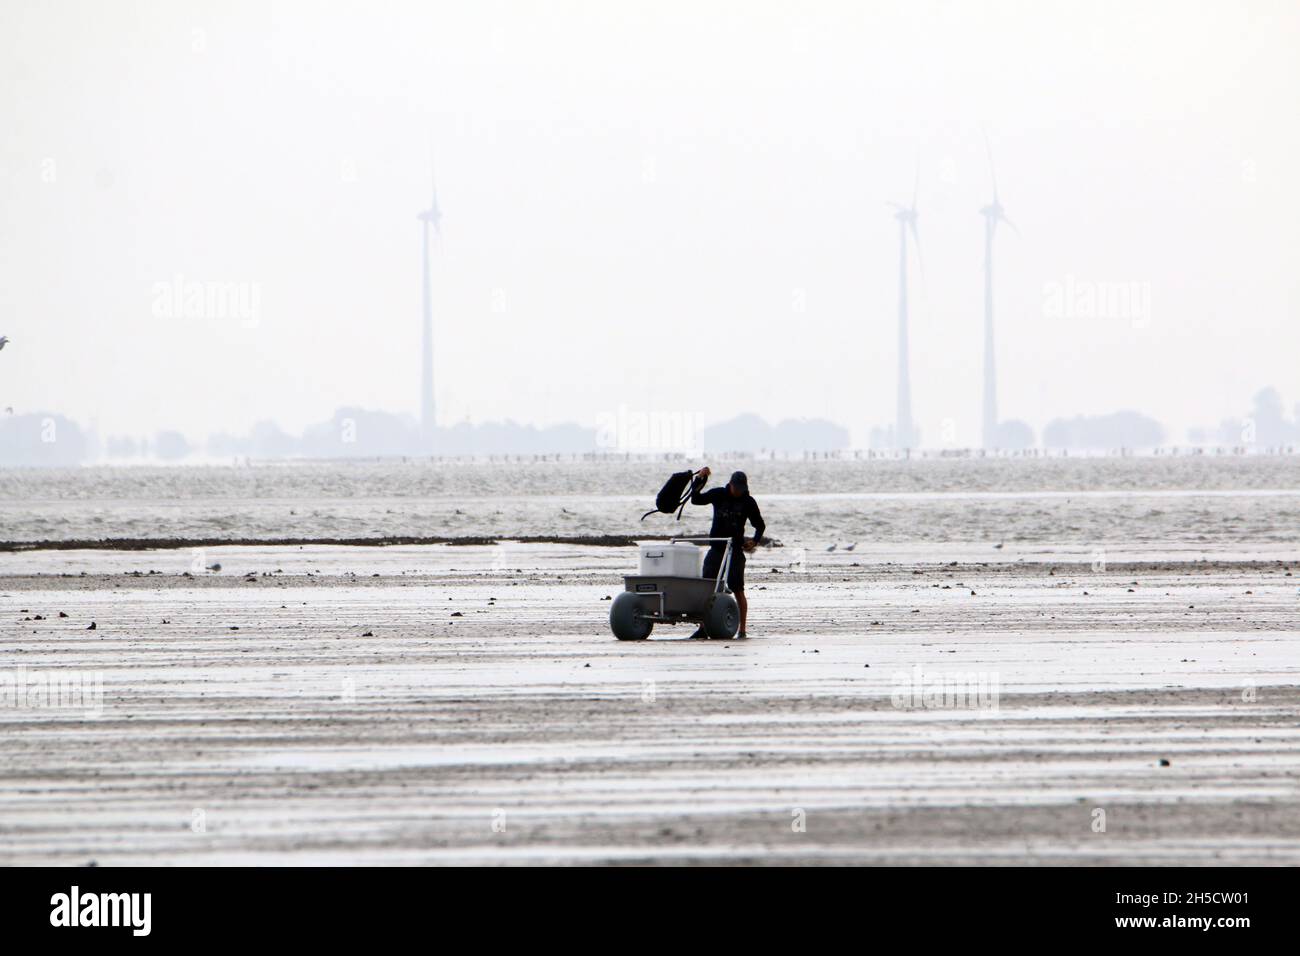 birdwatcher with trolley in the wadden sea, wind turbines in the background, Germany, Lower Saxony Wadden Sea National Park Stock Photo